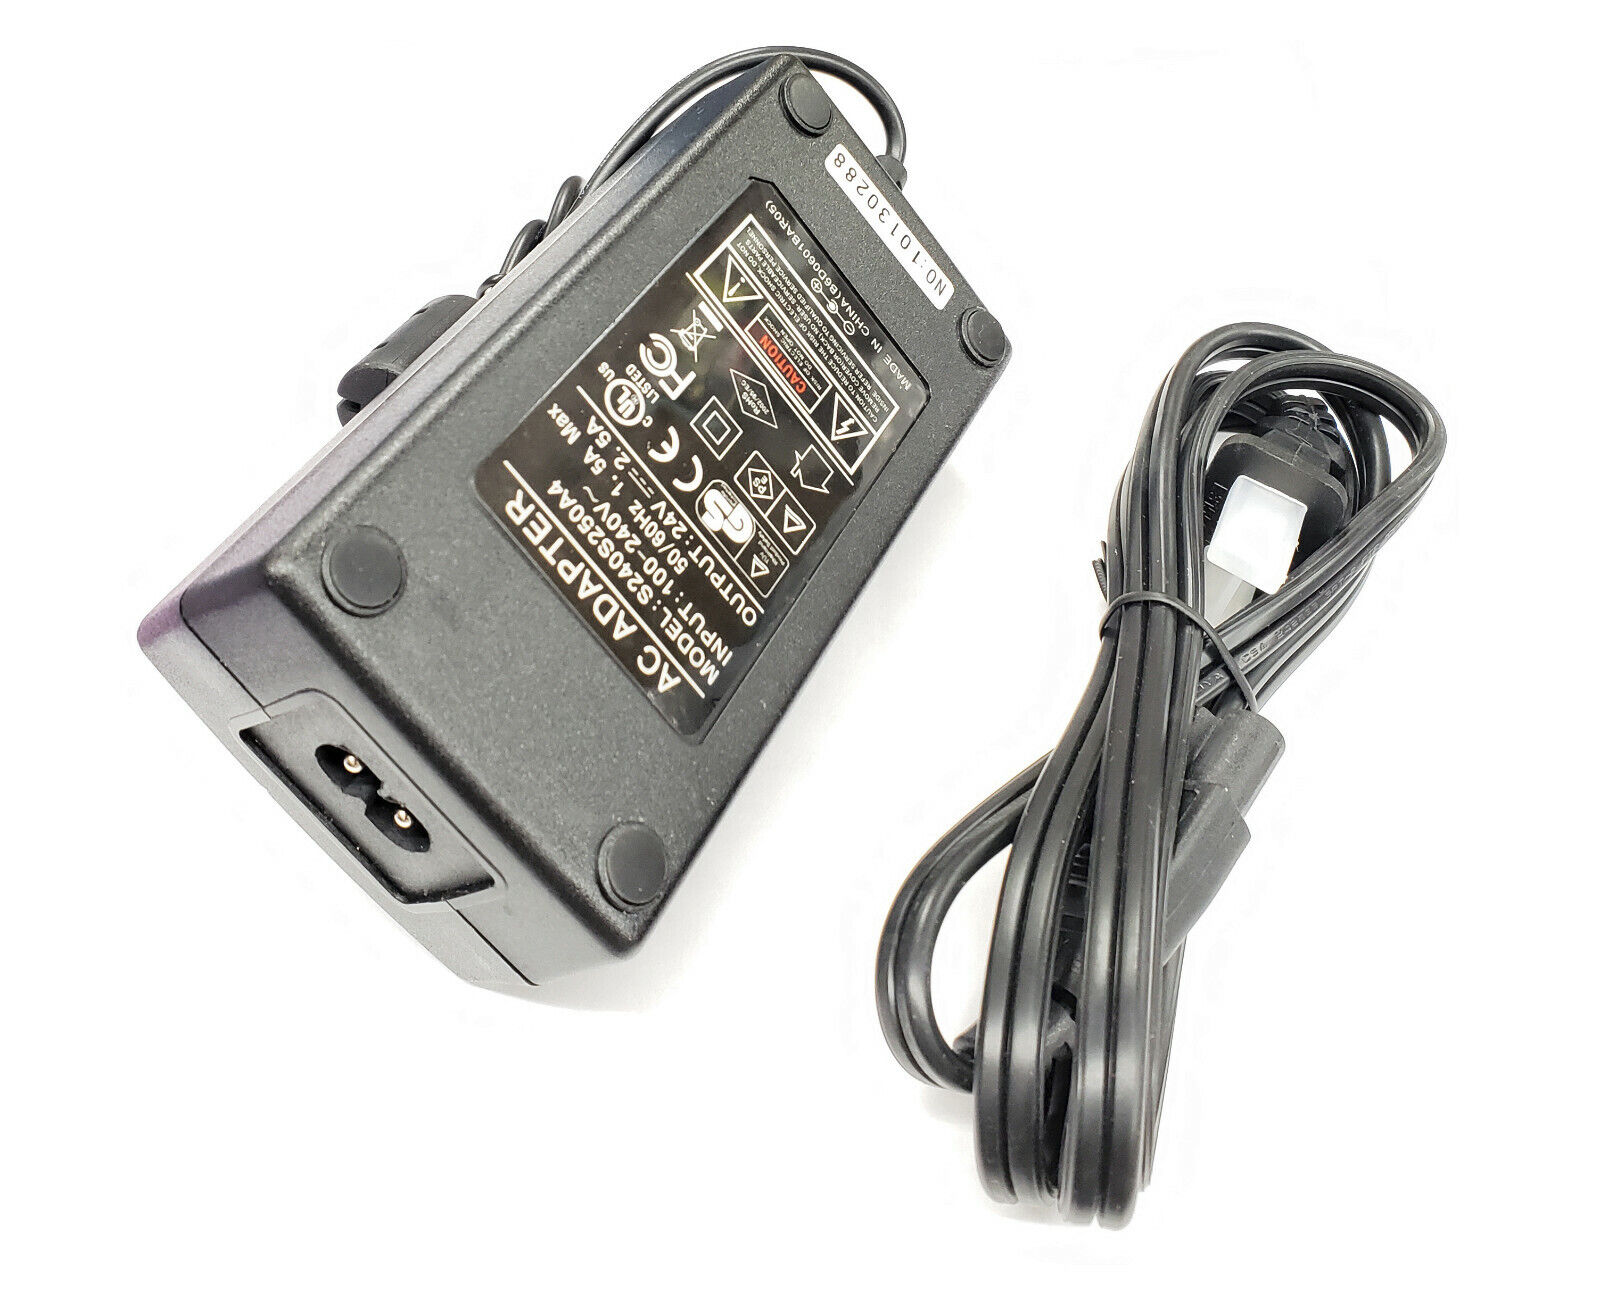 New 24V AC Adapter For DYMO LabelWriter 400 Thermal Label Printer-93089 